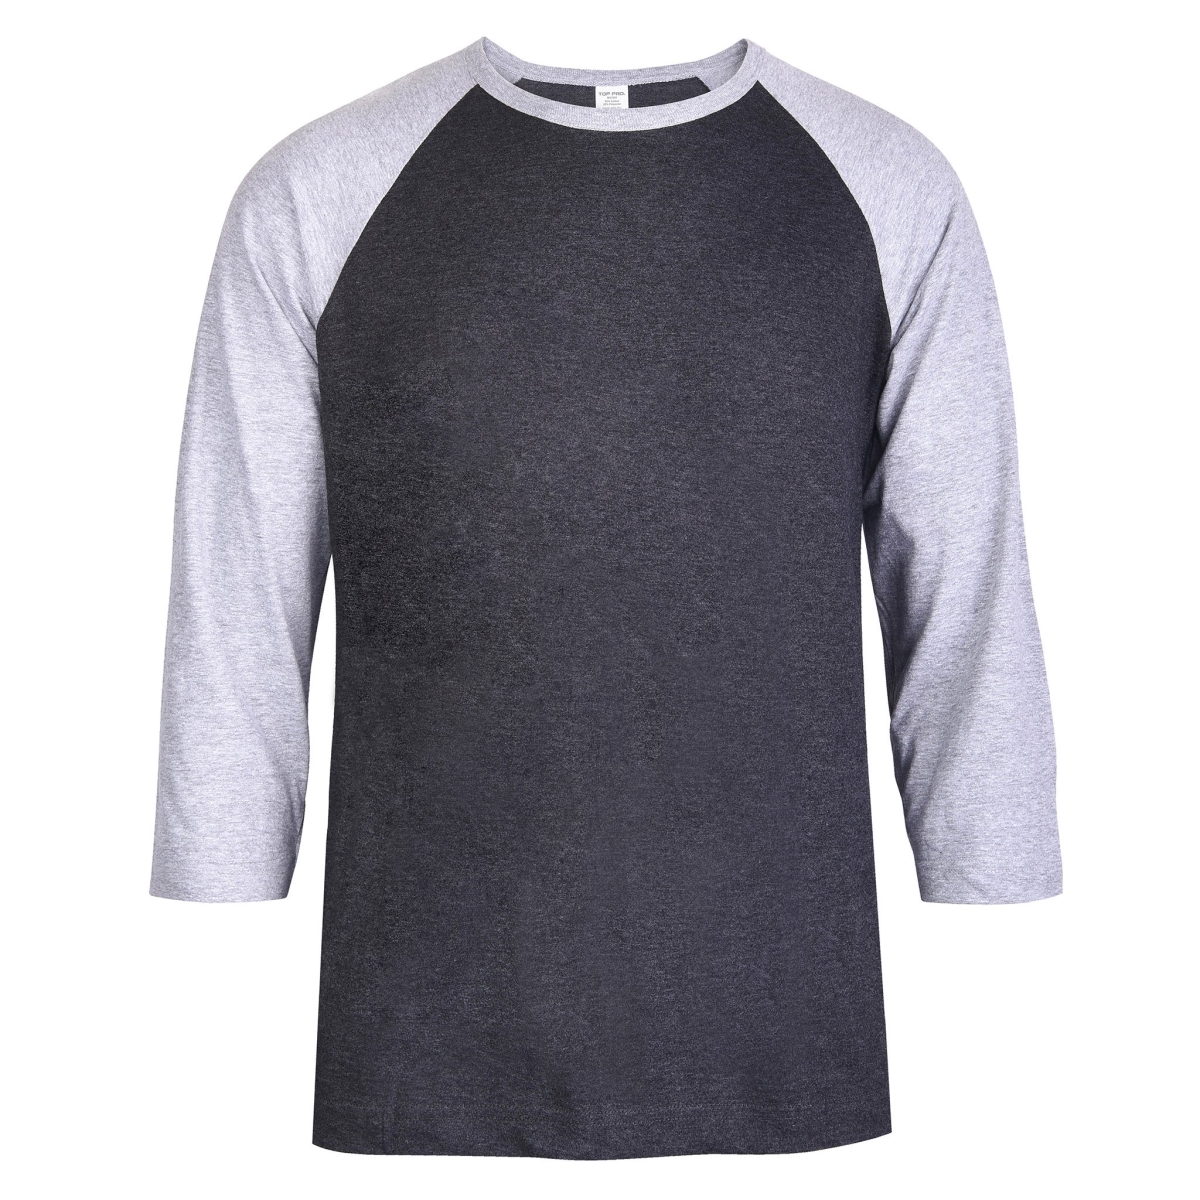 Picture of 247 Frenzy 247-MBT001 HCG-XL Mens Essentials Top Pro 0.75 Sleeve Raglan Baseball T-Shirt&#44; Heather Charcoal Gray - Extra Large